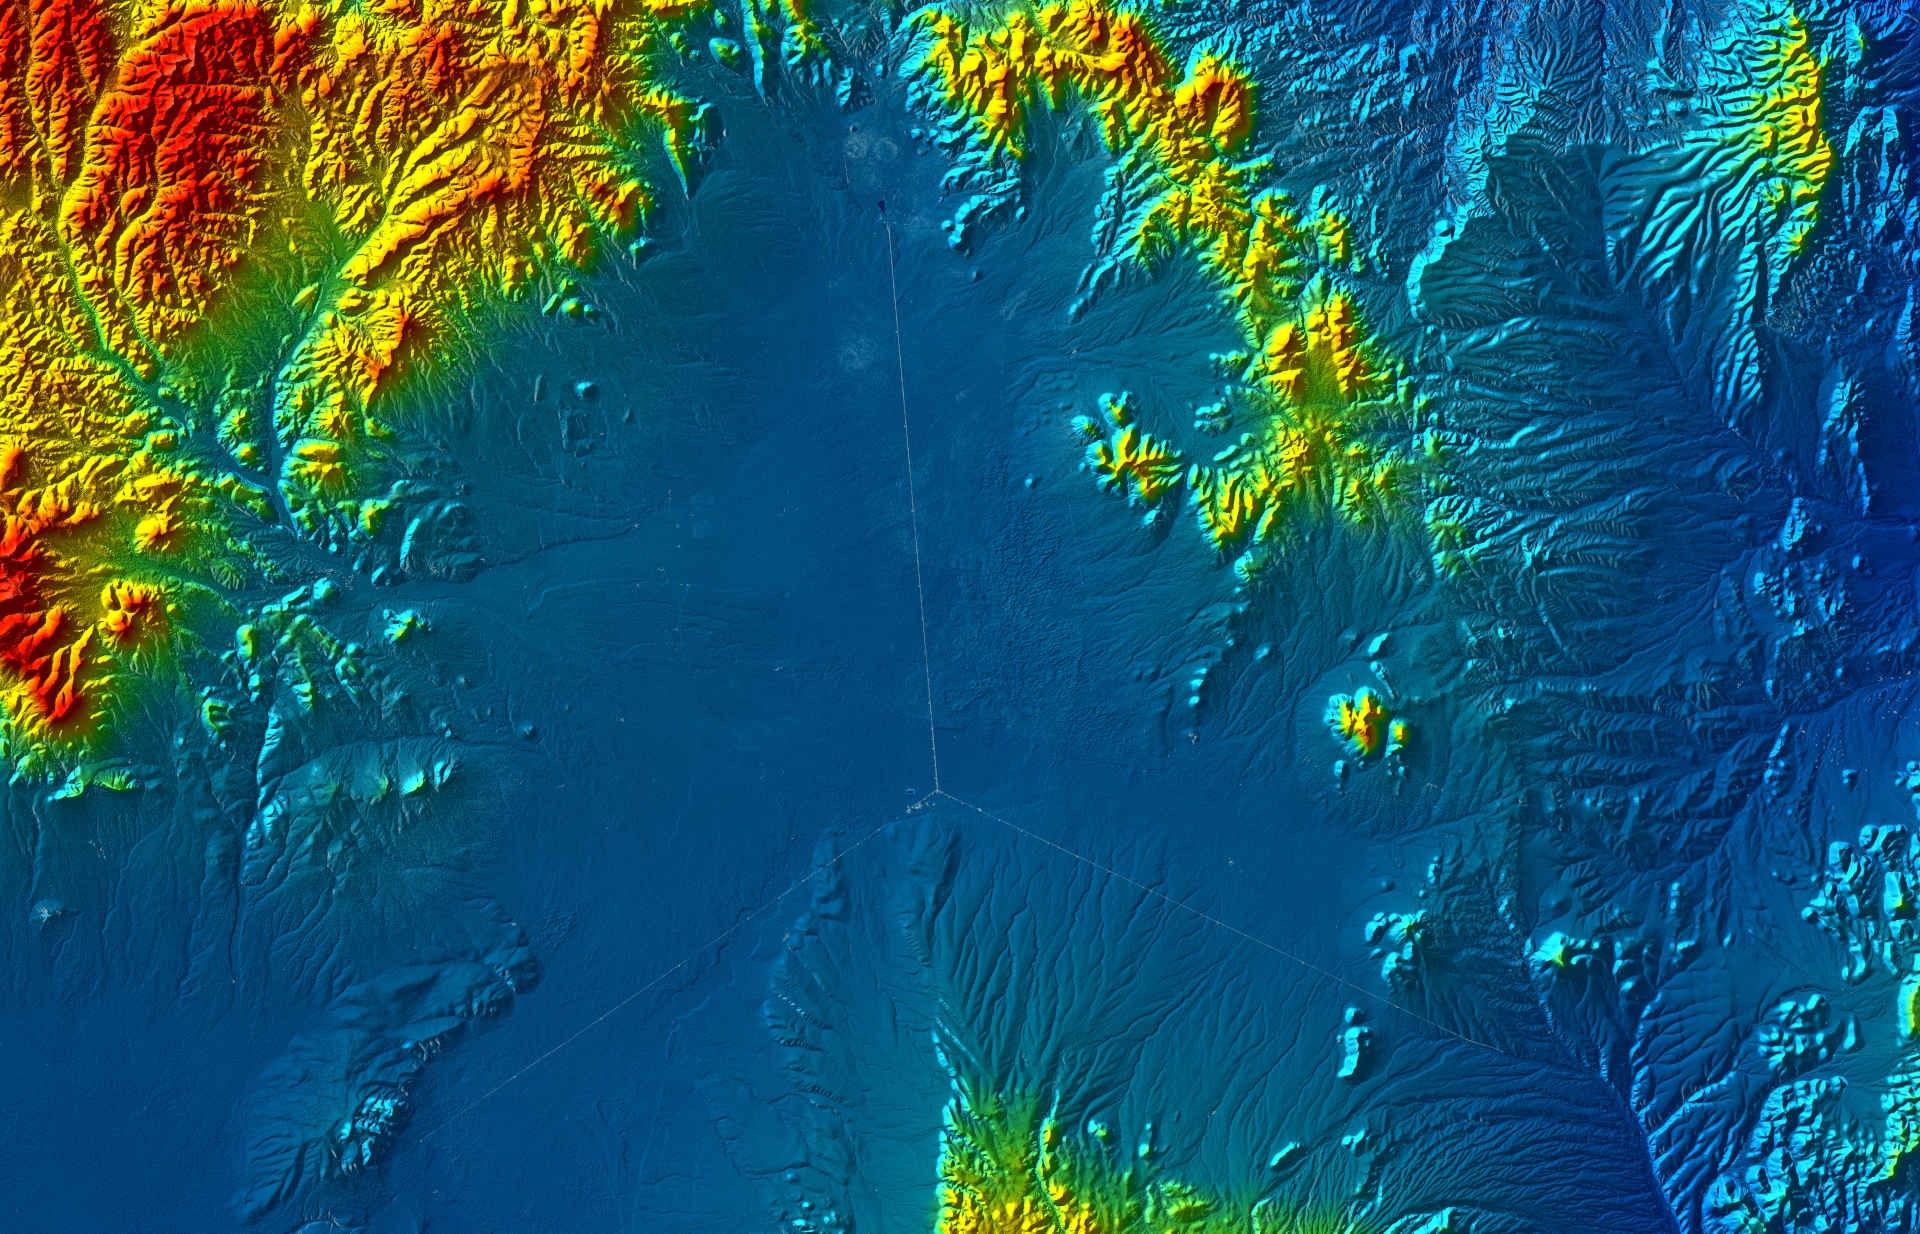 Elevation model showing the Very Large Array in New Mexico